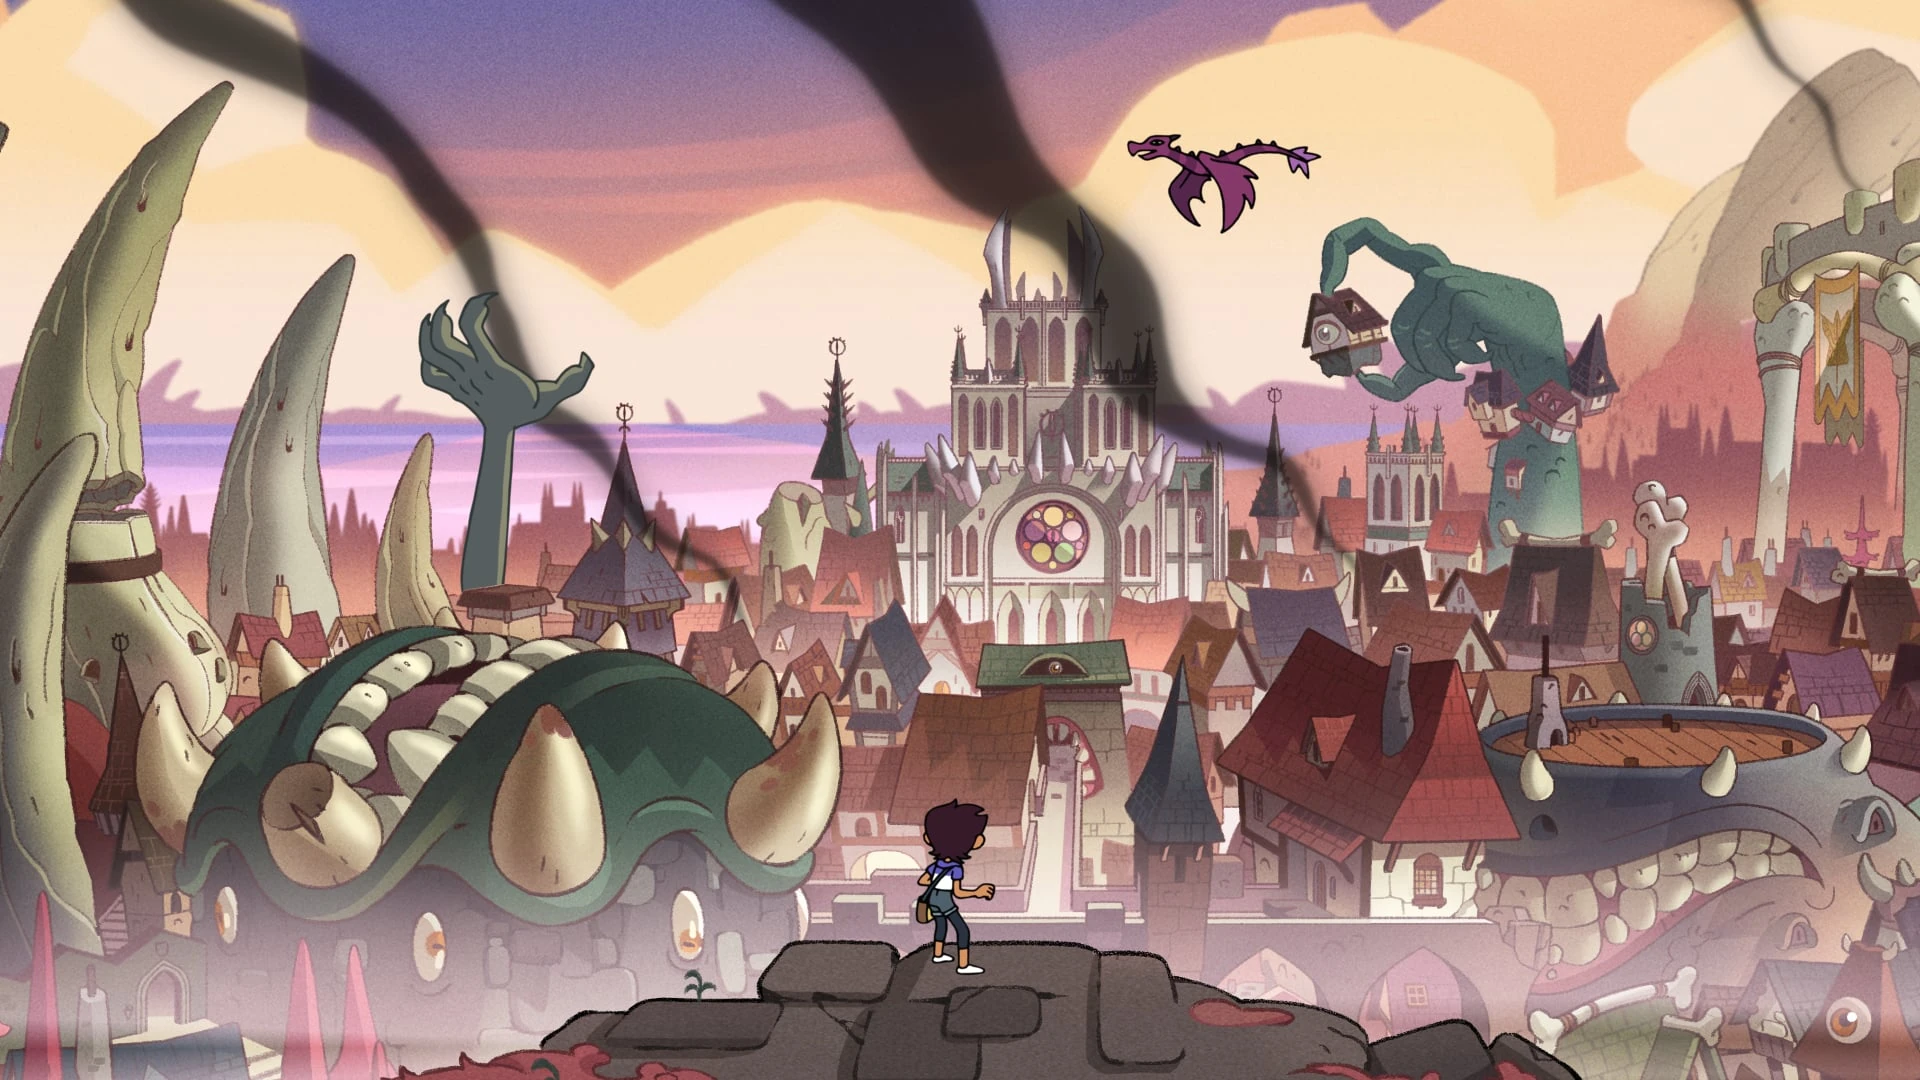 Luz in the foreground stares down at the town of Bonesborough: a somewhat terrifying looking town with some buildings having eyes, mouths, or bones. In the center of the background is the Emperor's castle.